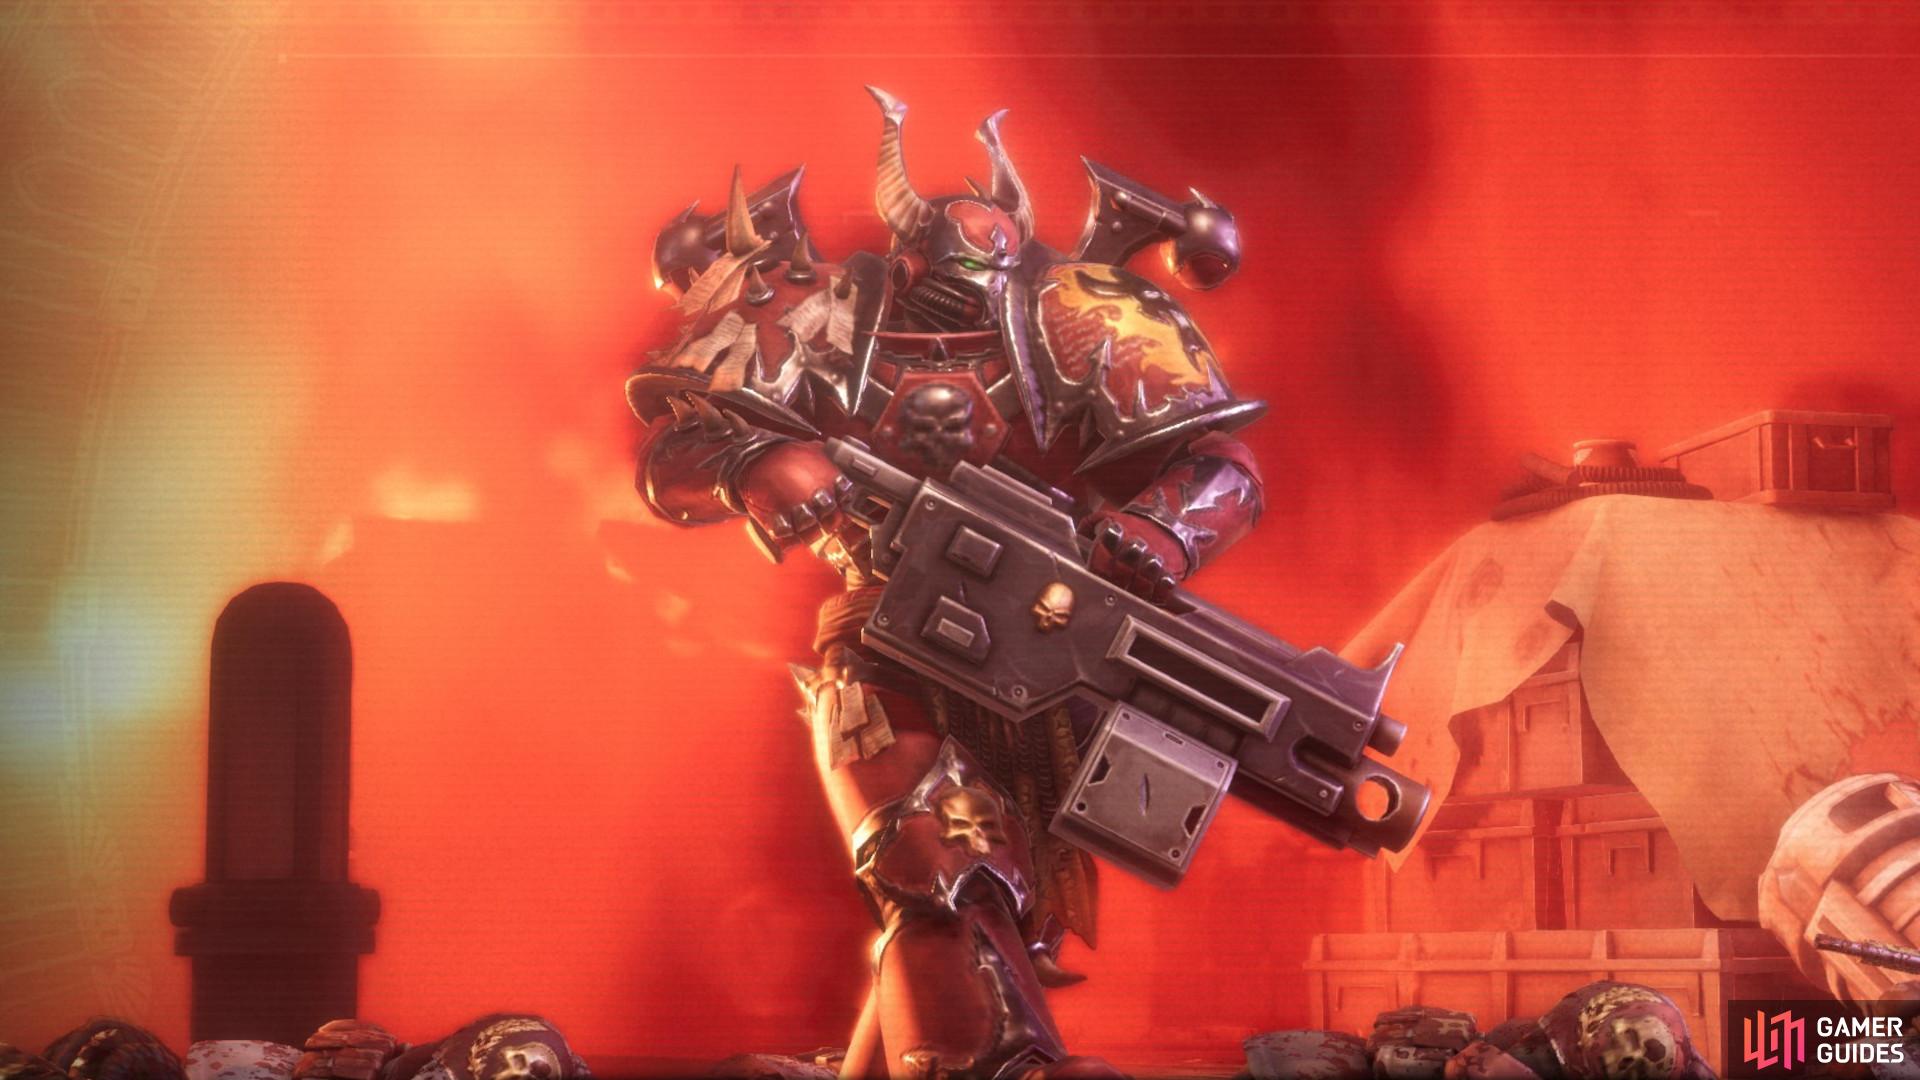 A guide to beating the Chaos Space Marine Boss in Rogue Trader, offering tips on using all companions to their best in the fight.